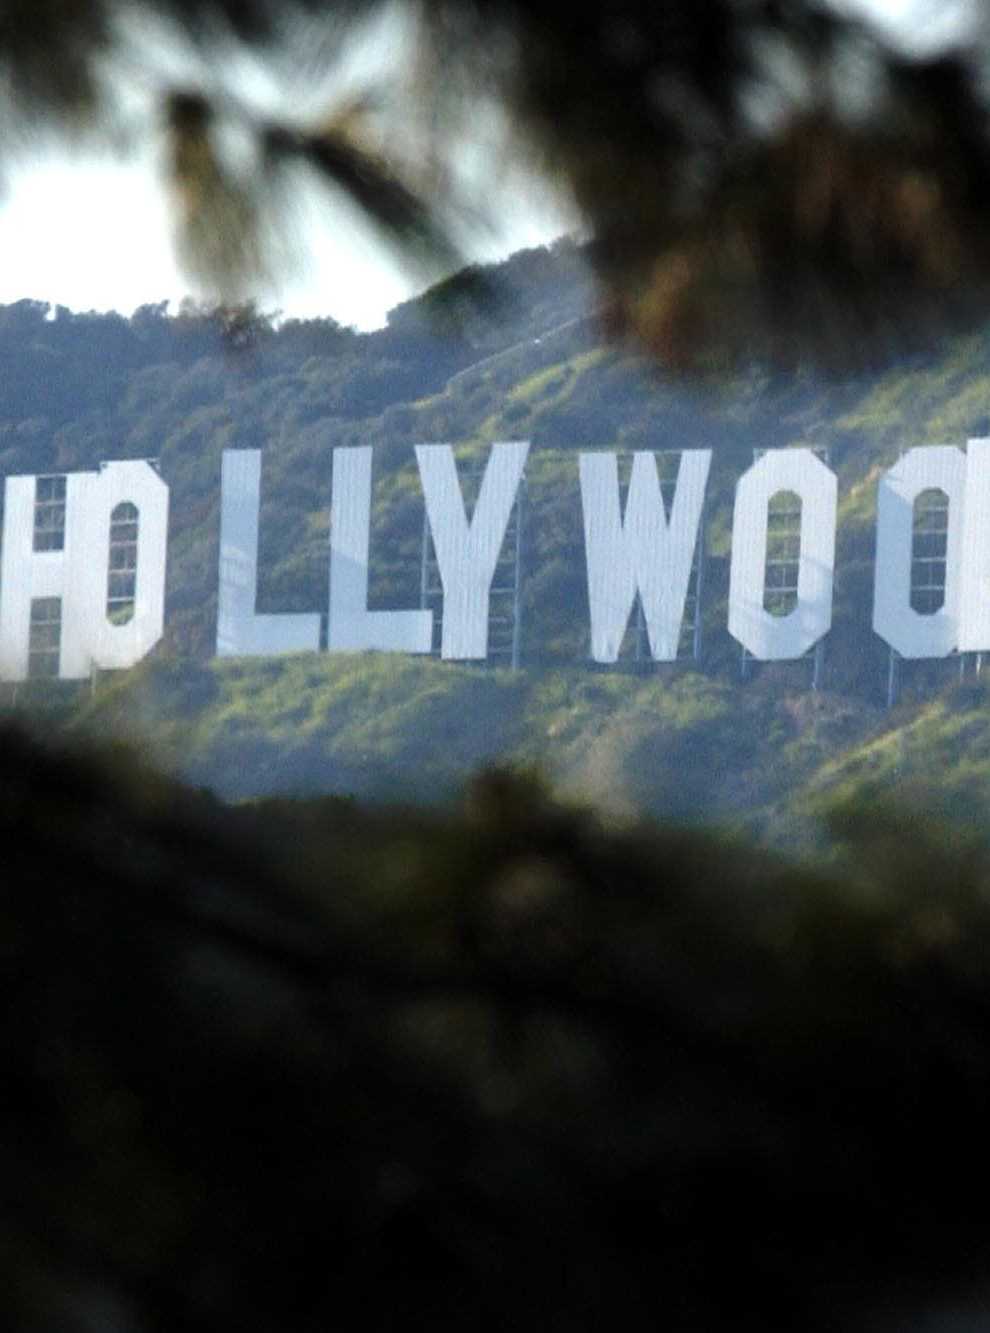 The Hollywood sign was originally built in 1923 (Myung Jung Kim/AP)